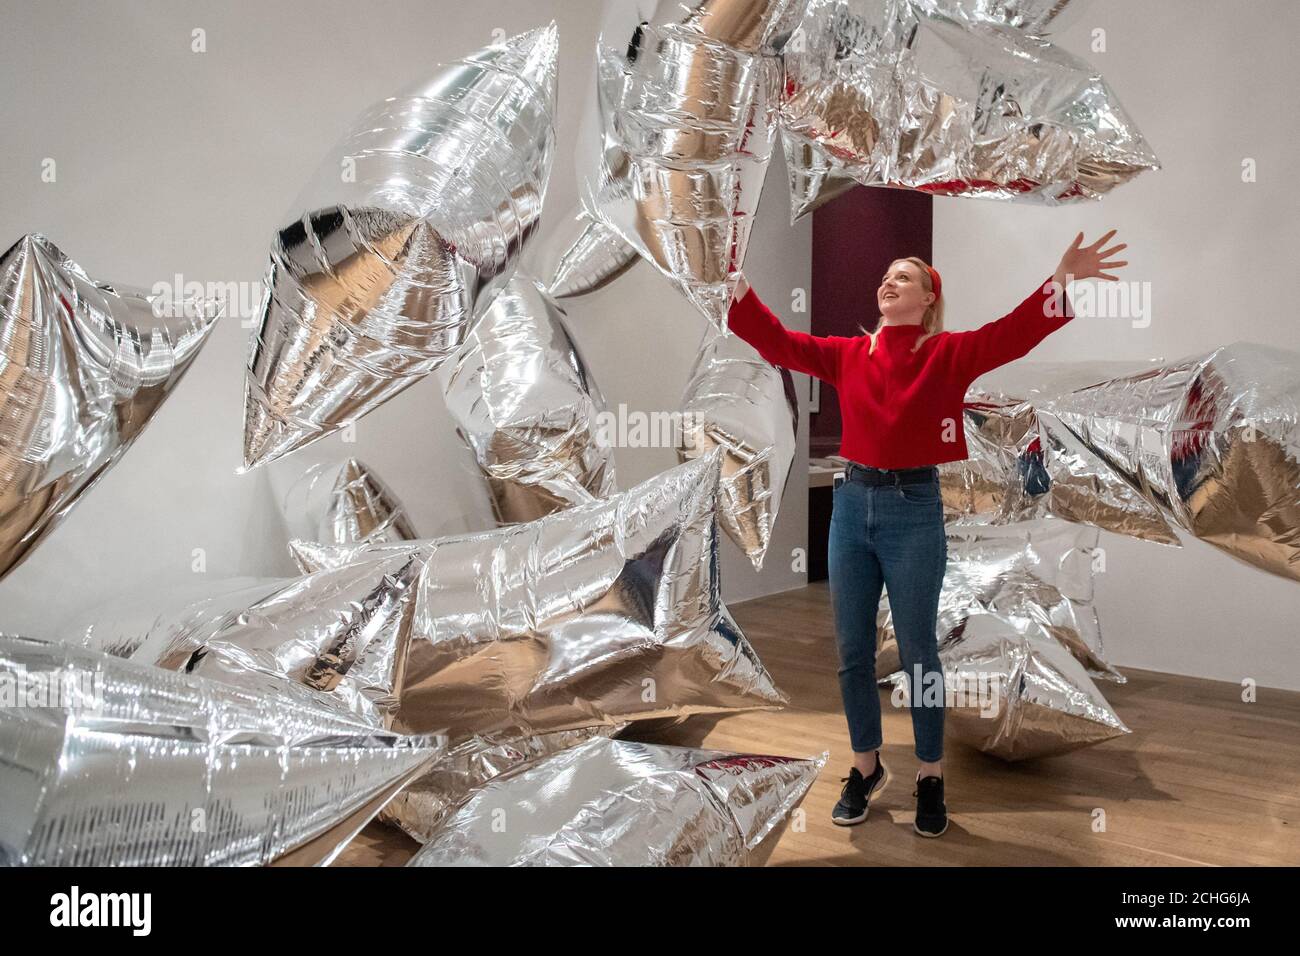 A Tate Modern gallery assistant interacts with the 'Silver Clouds' installation, at a press view of major new Andy Warhol exhibition at Tate Modern, London, which features classic pop art pieces and works never shown before in the UK. PA Photo. Picture date: Tuesday March 10, 2020. Photo credit should read: Dominic Lipinski/PA Wire Stock Photo